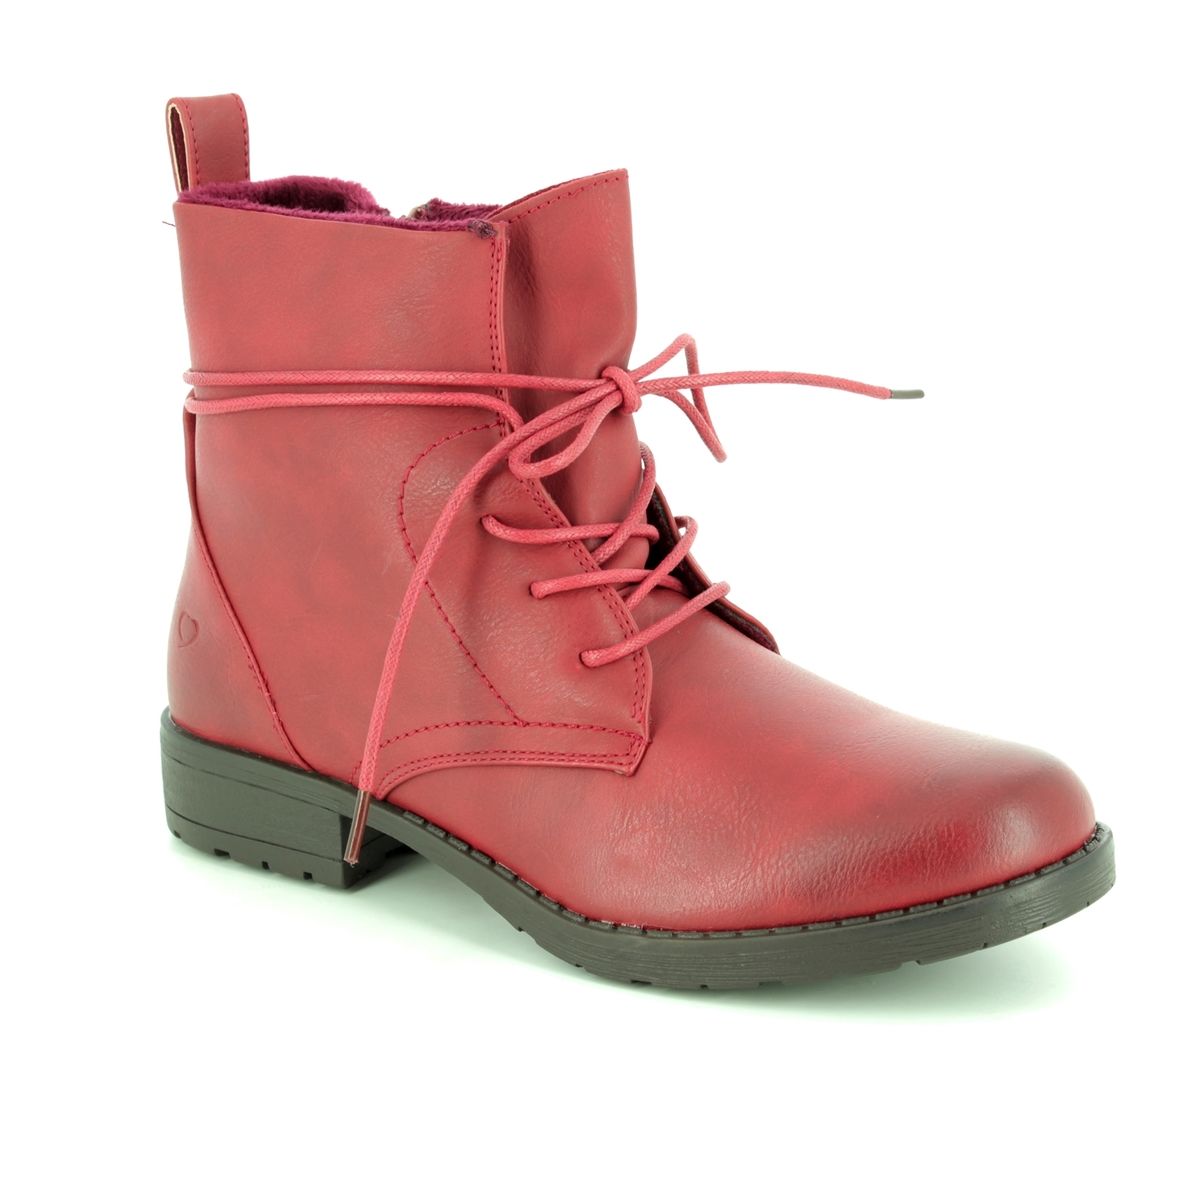 heavenly feet wedge ankle boots